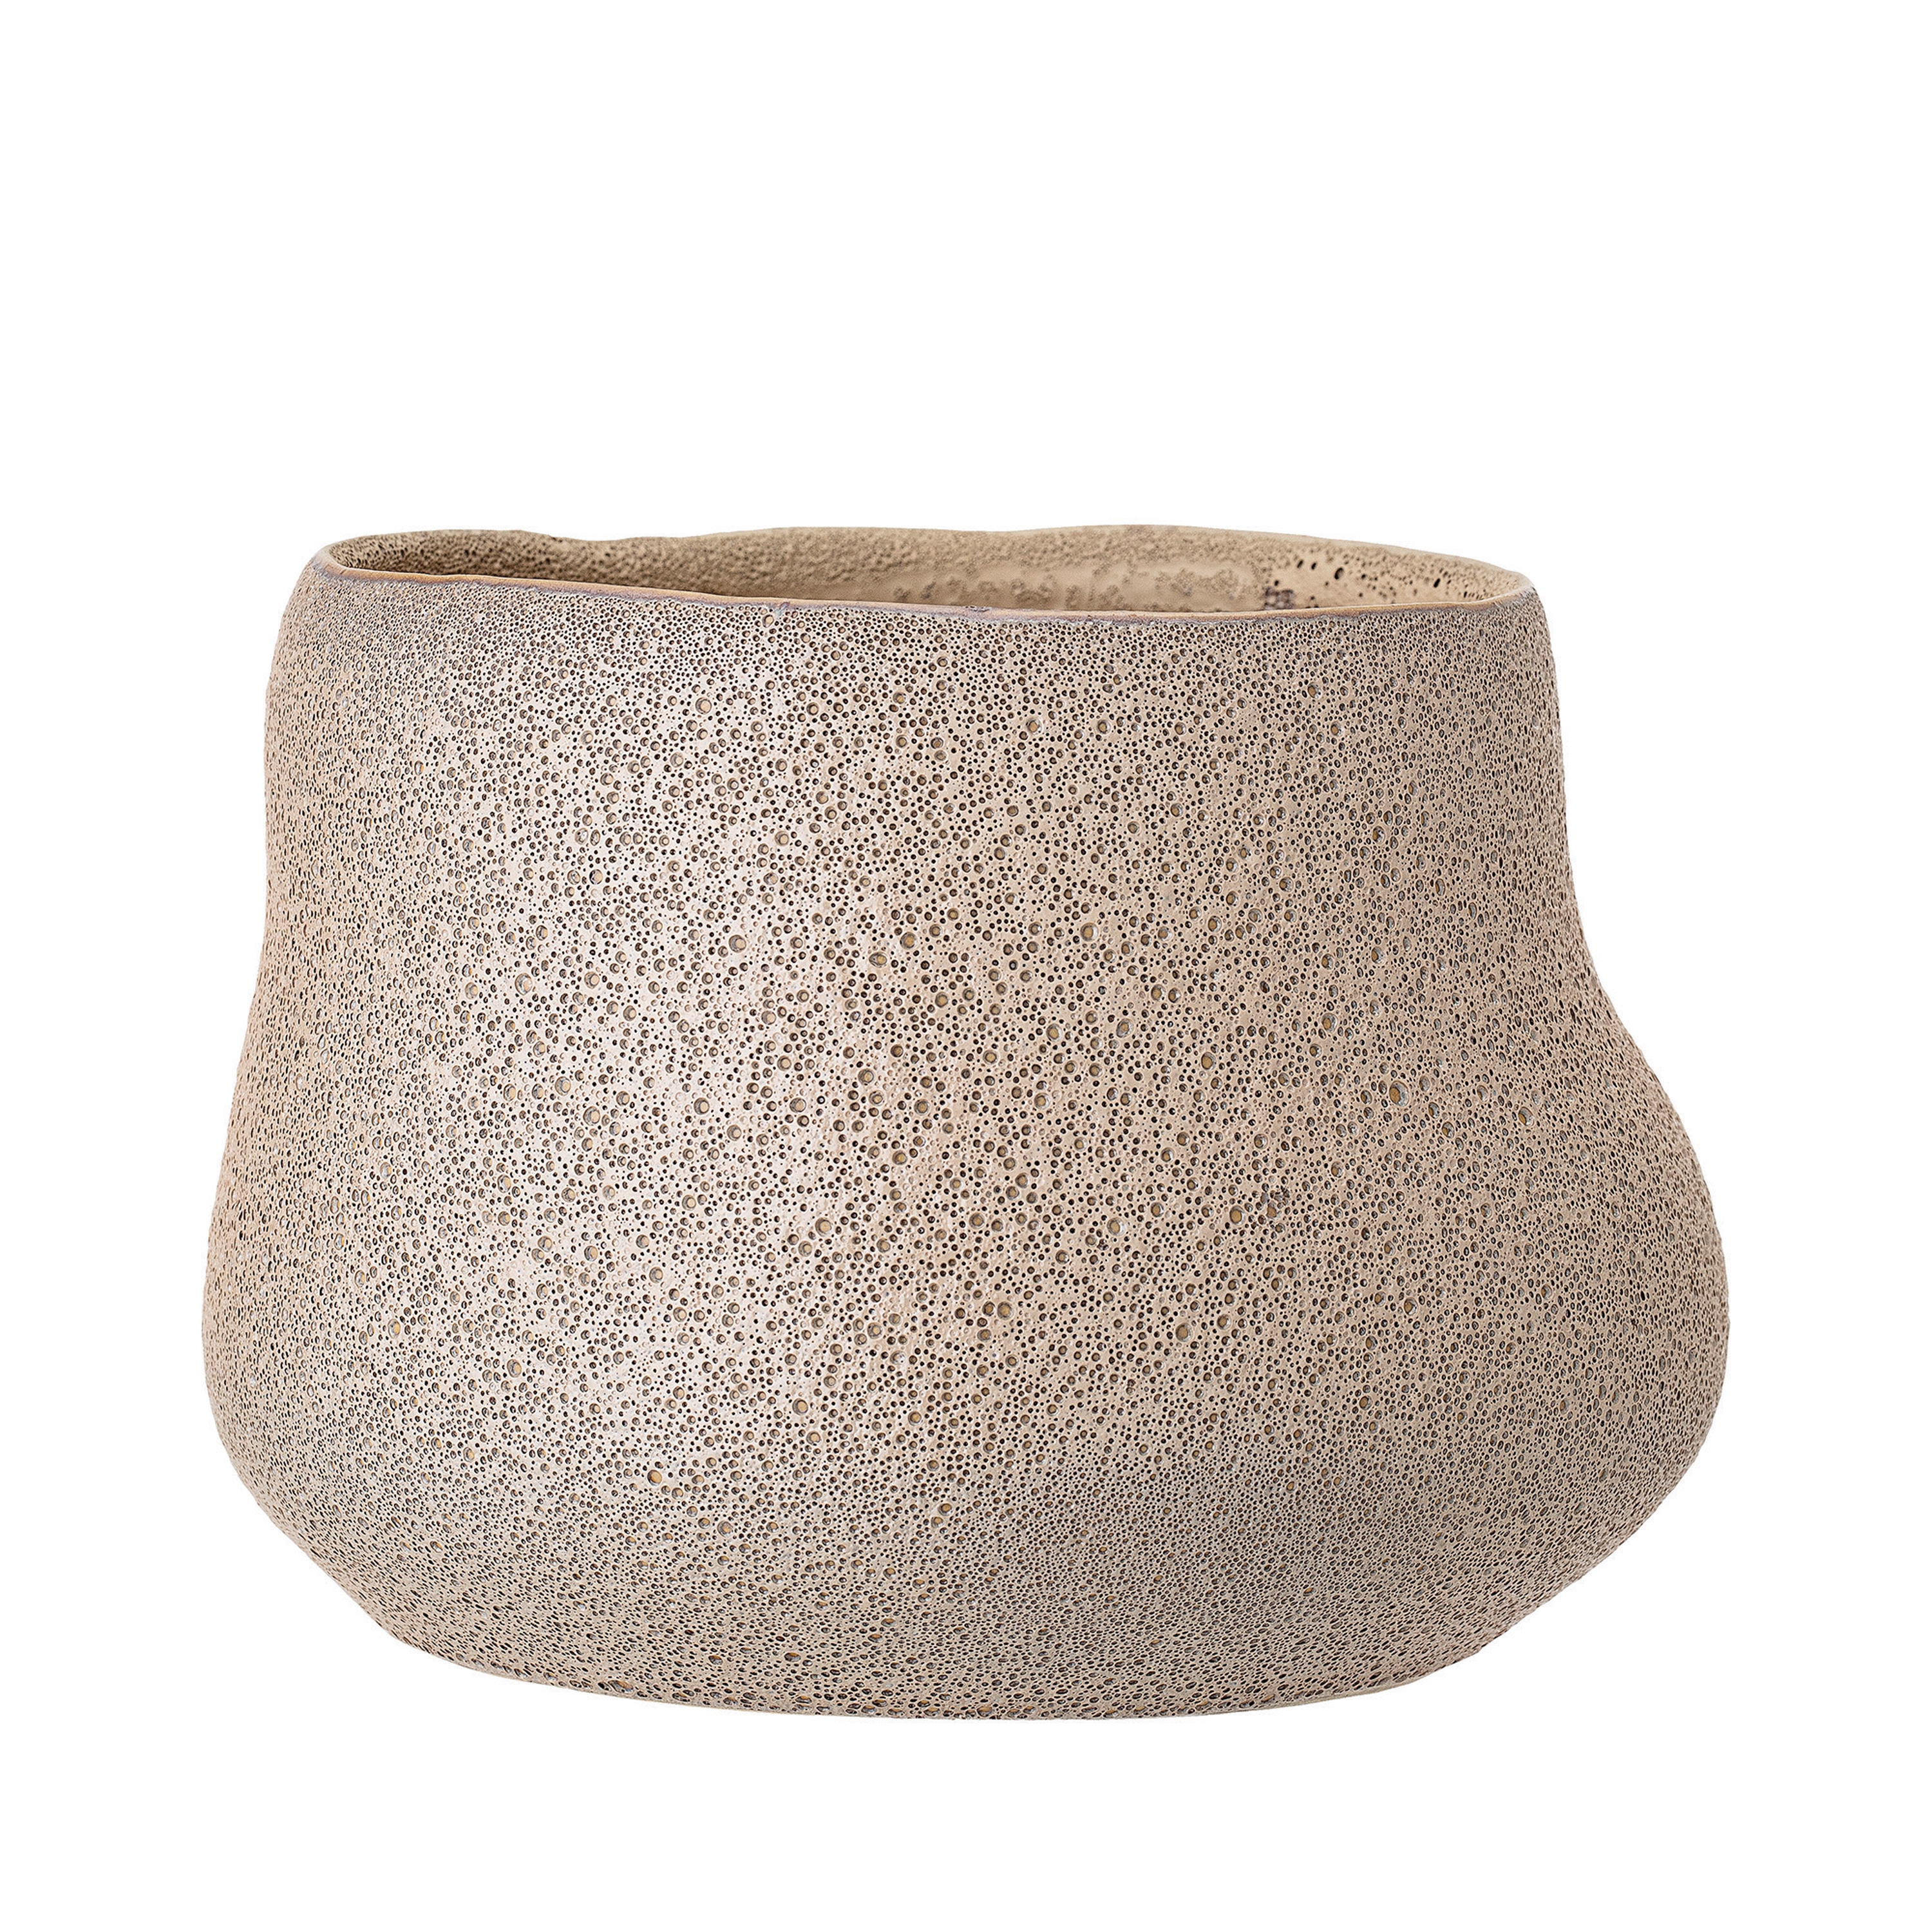 Matte Taupe Stoneware Planter with Reactive Glaze Finish (Each one will vary) - Image 0